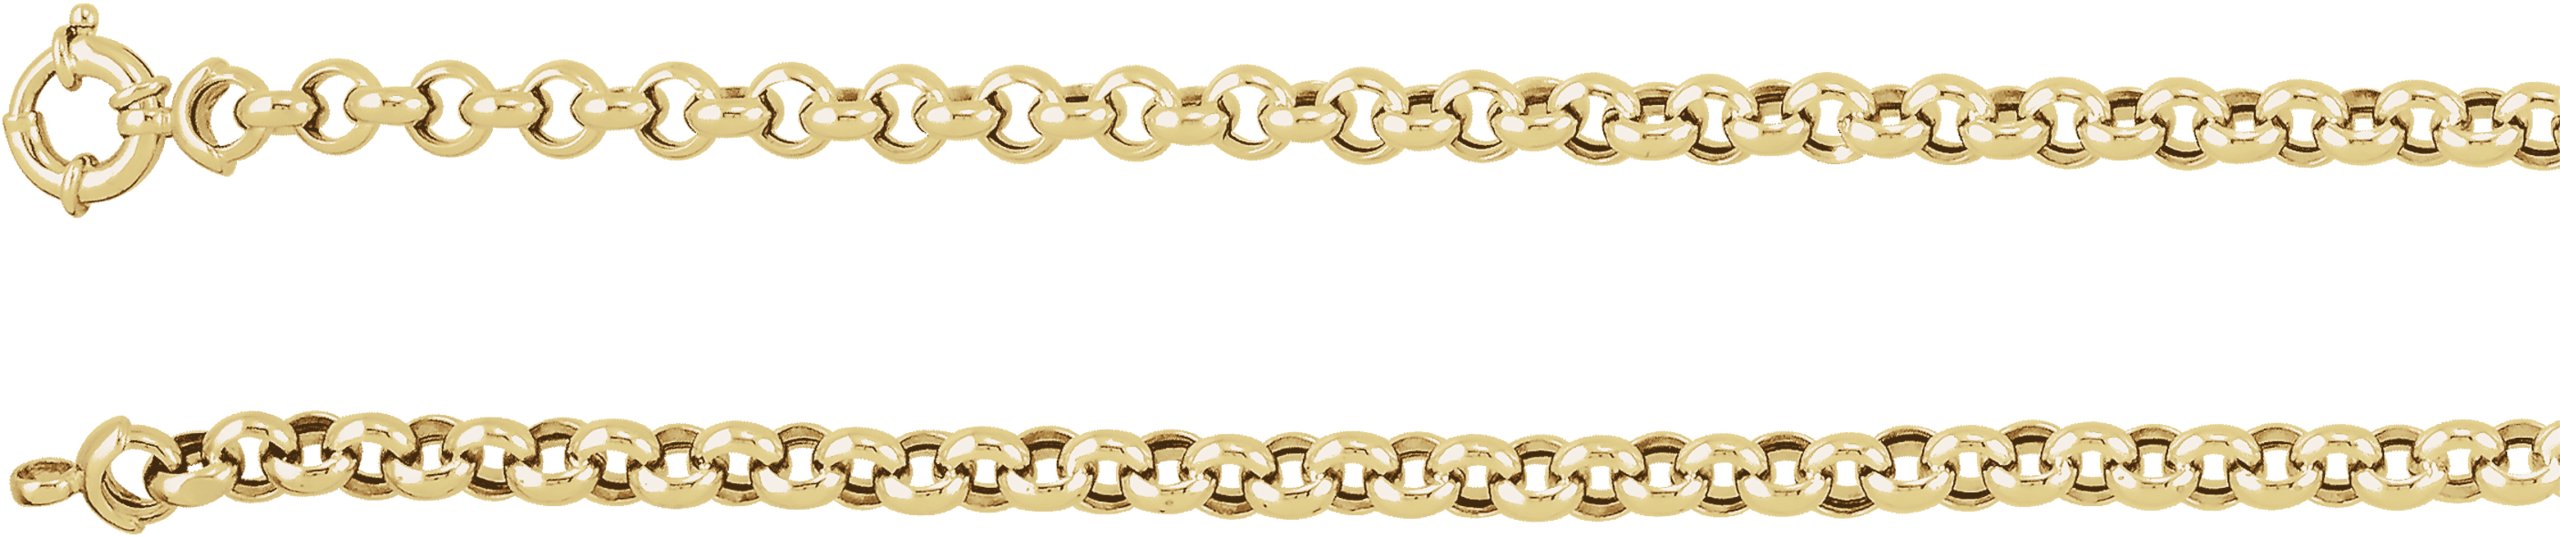 14K Yellow 6.5 mm Hollow Rolo 7" Chain
